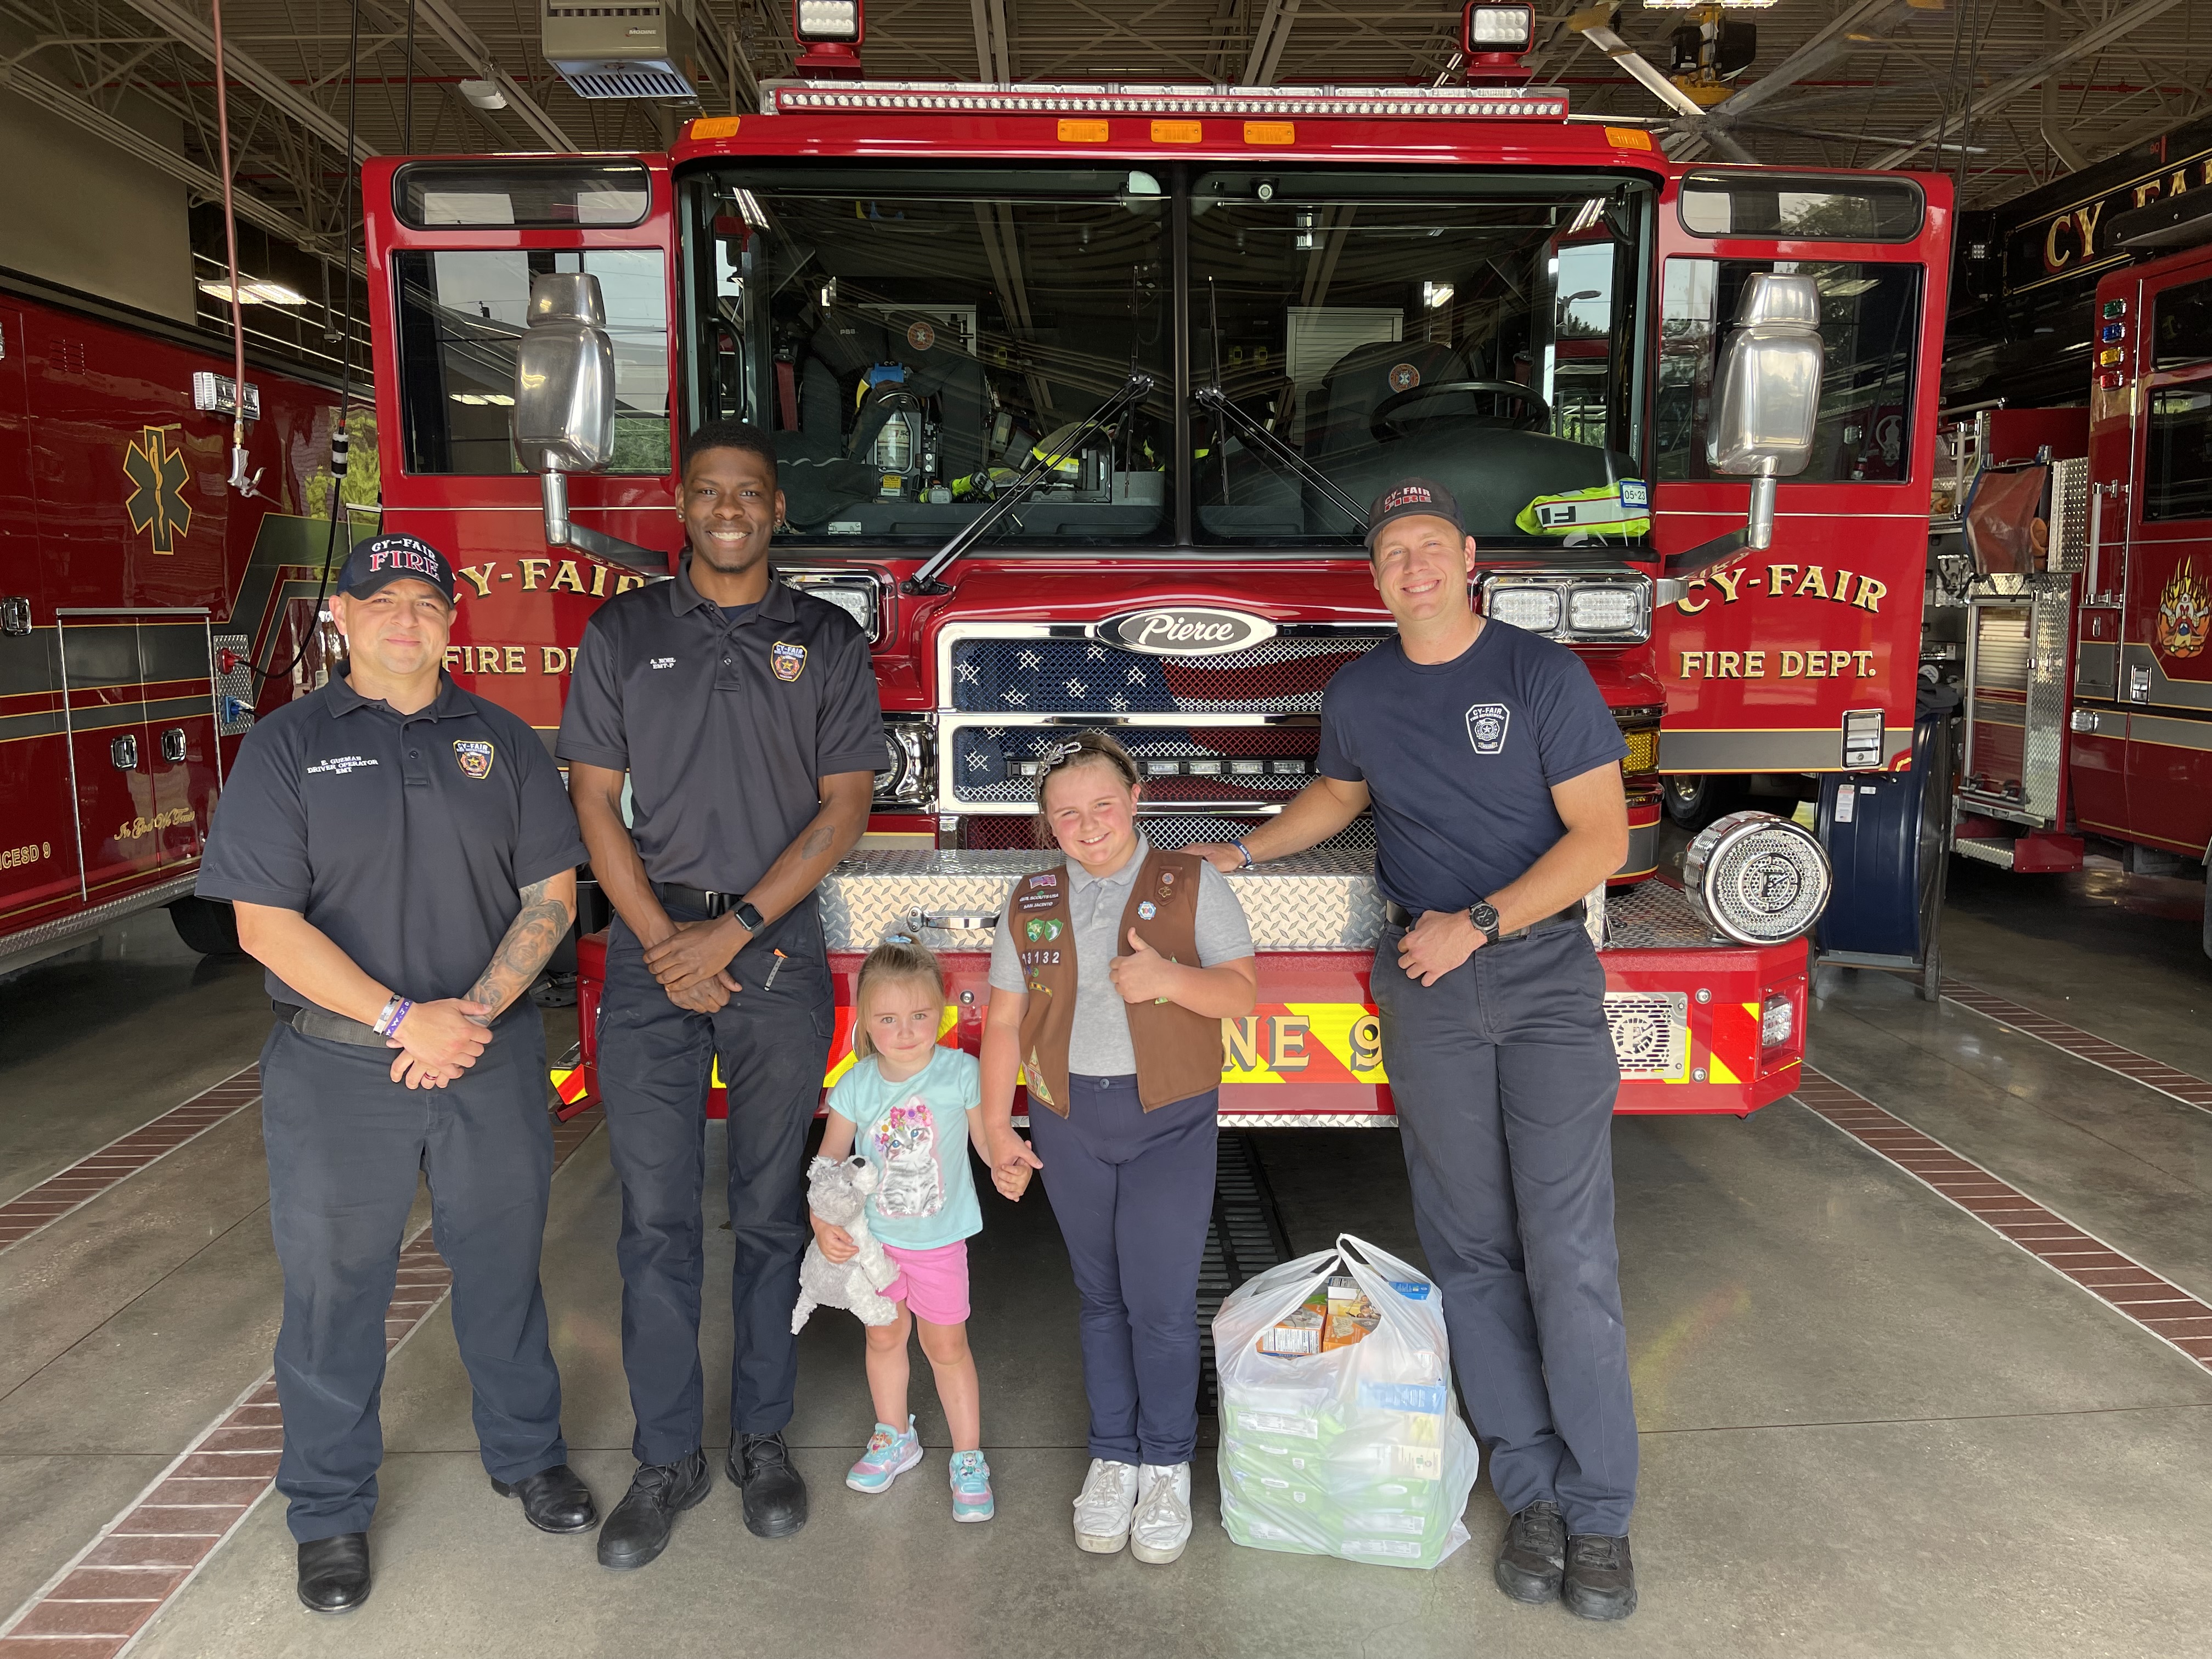 Hearthstone Resident Donates Girl Scout Cookies to Local Fire Station